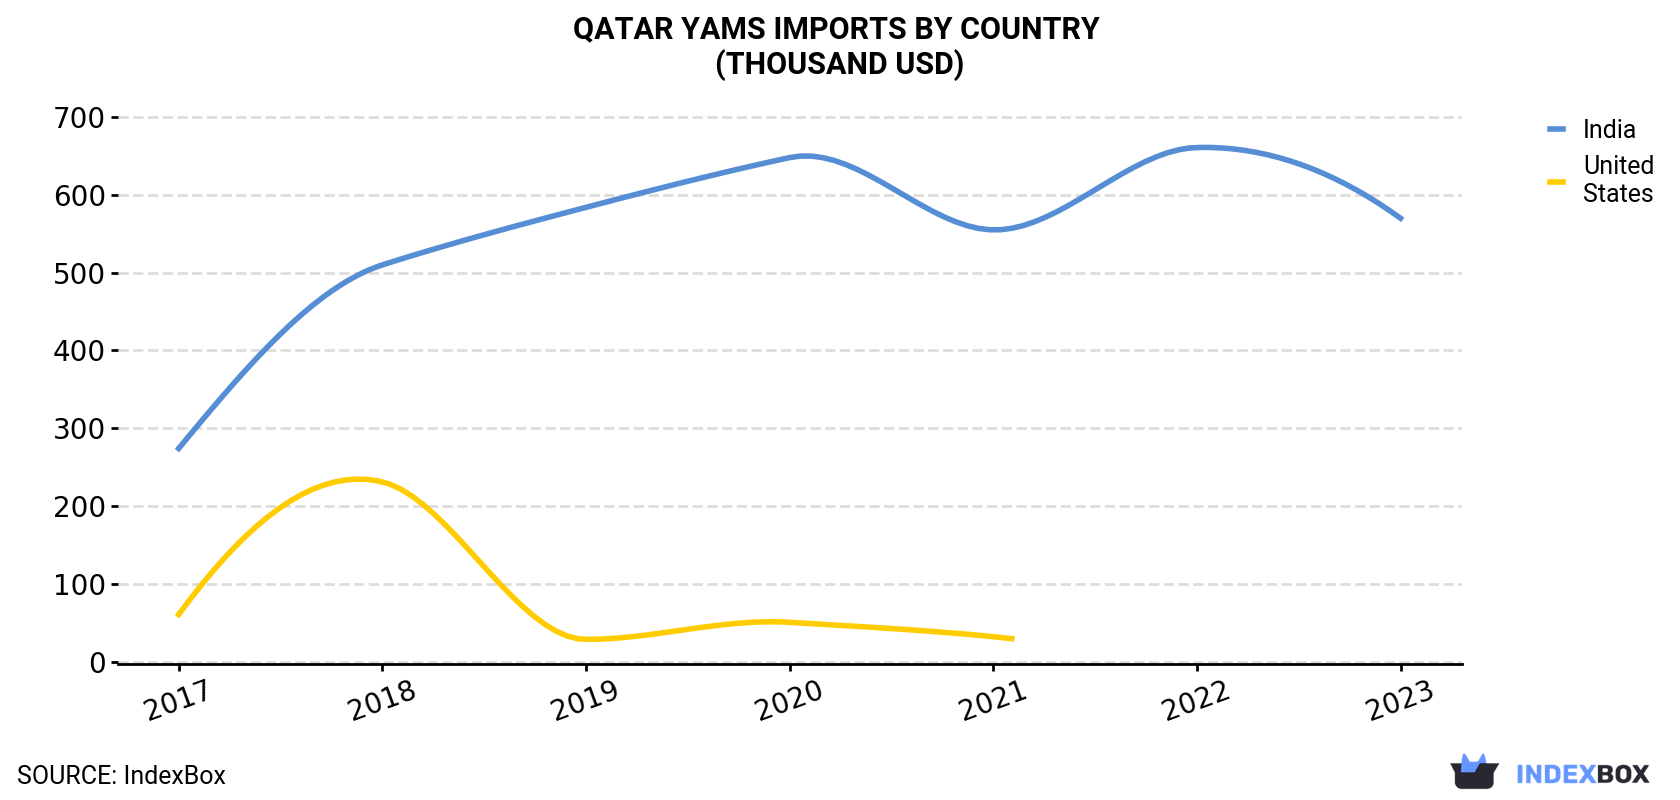 Qatar Yams Imports By Country (Thousand USD)